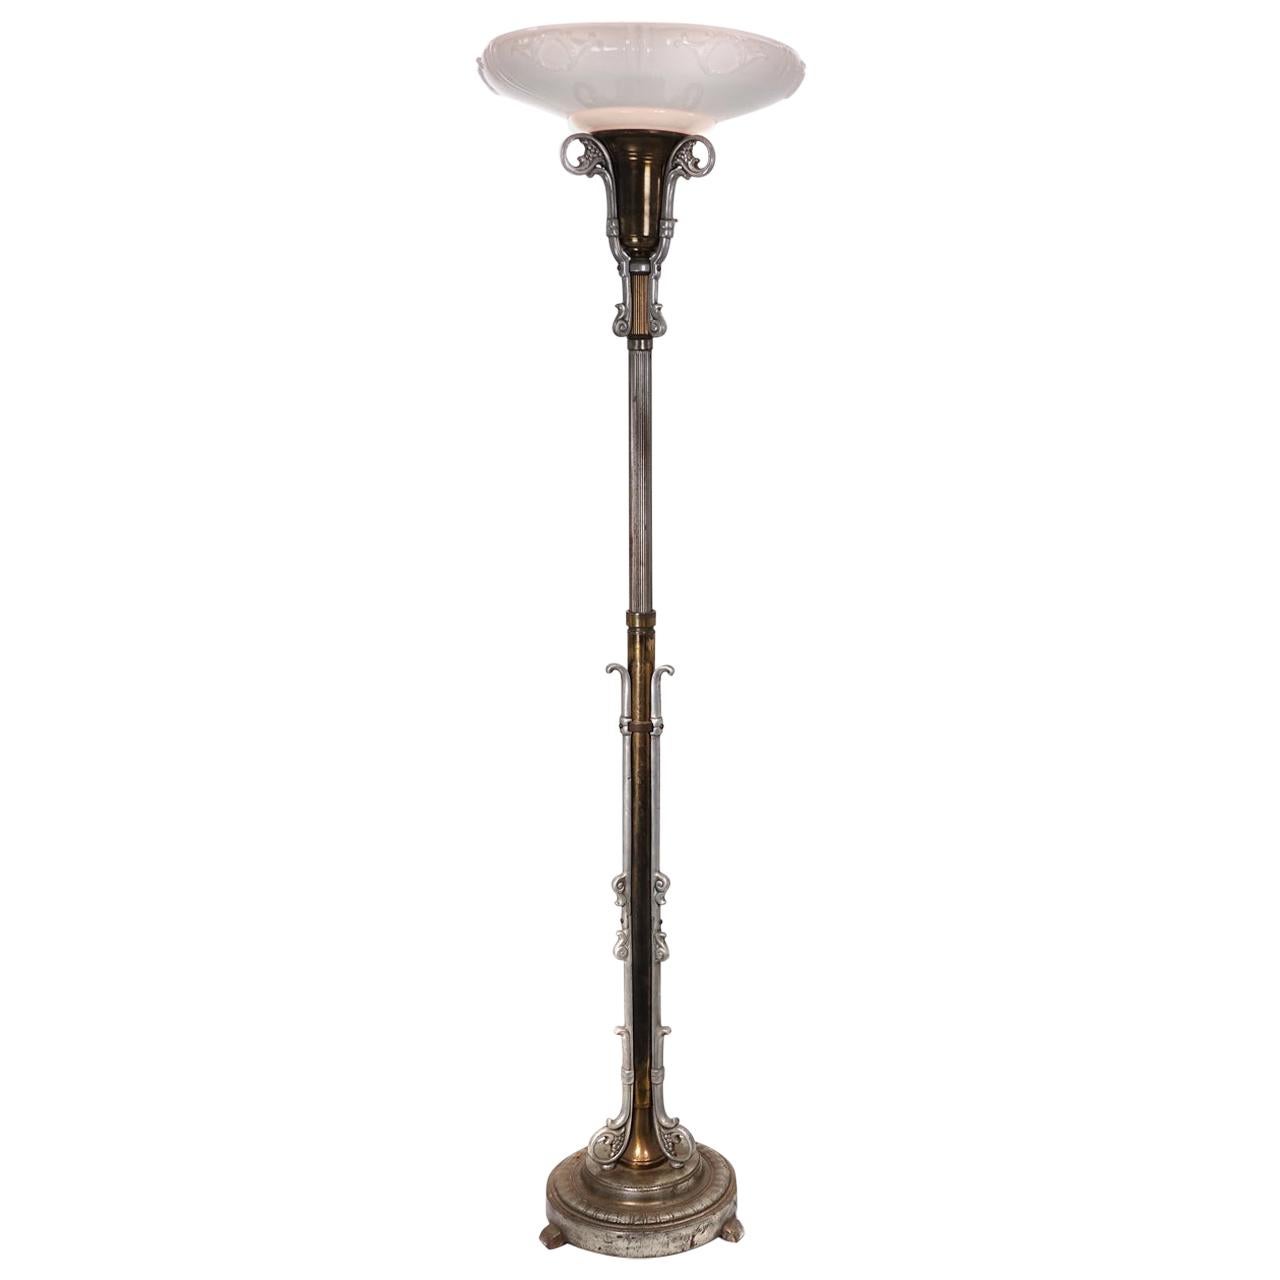 Articulated Art Deco Torchiere Lamp